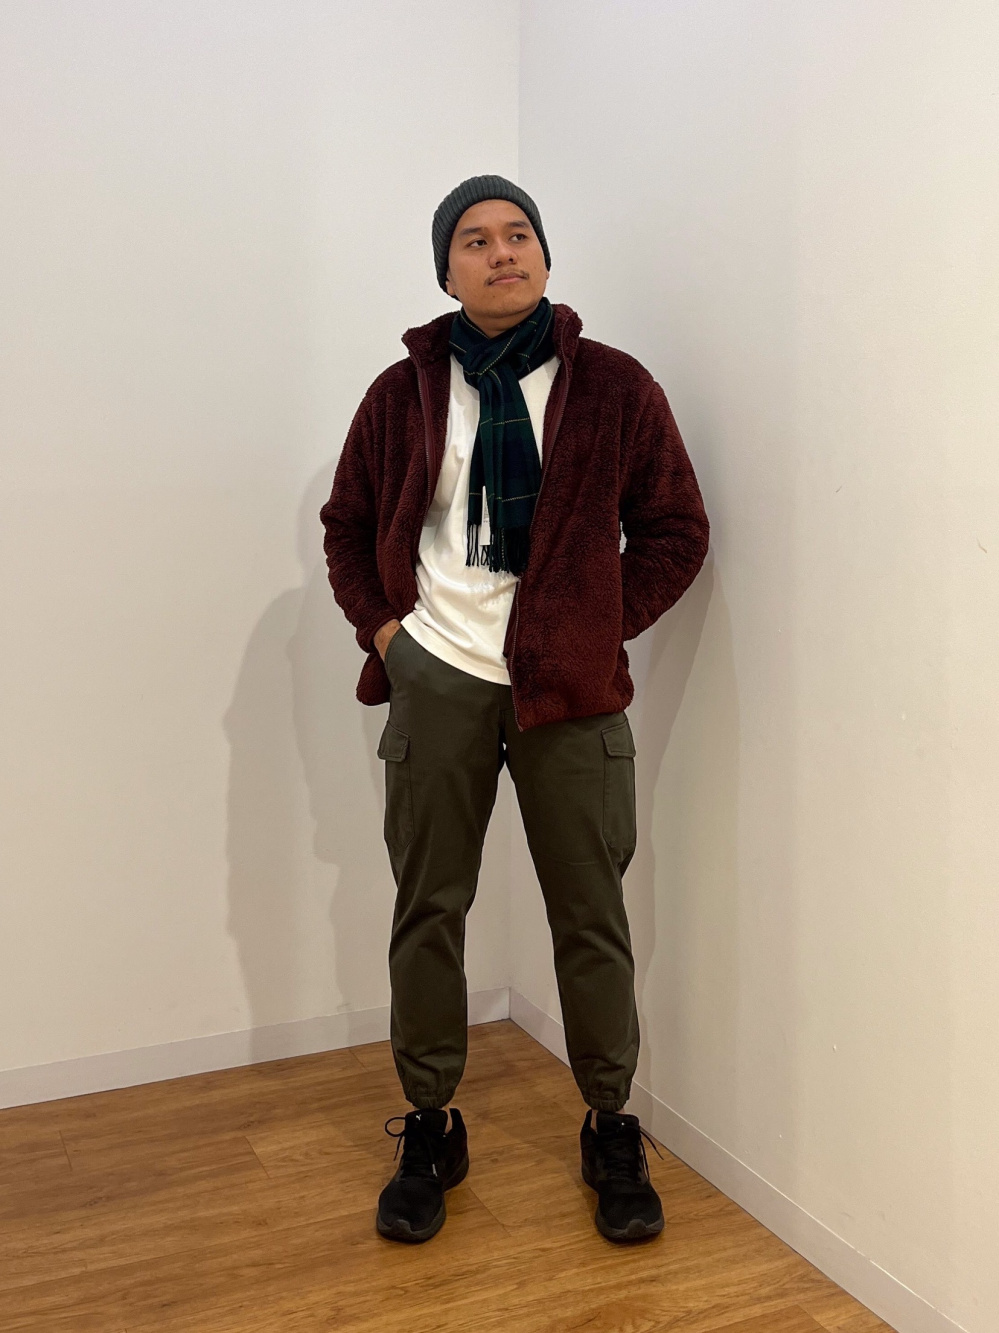 Check styling ideas for「Cargo Jogger Pants」